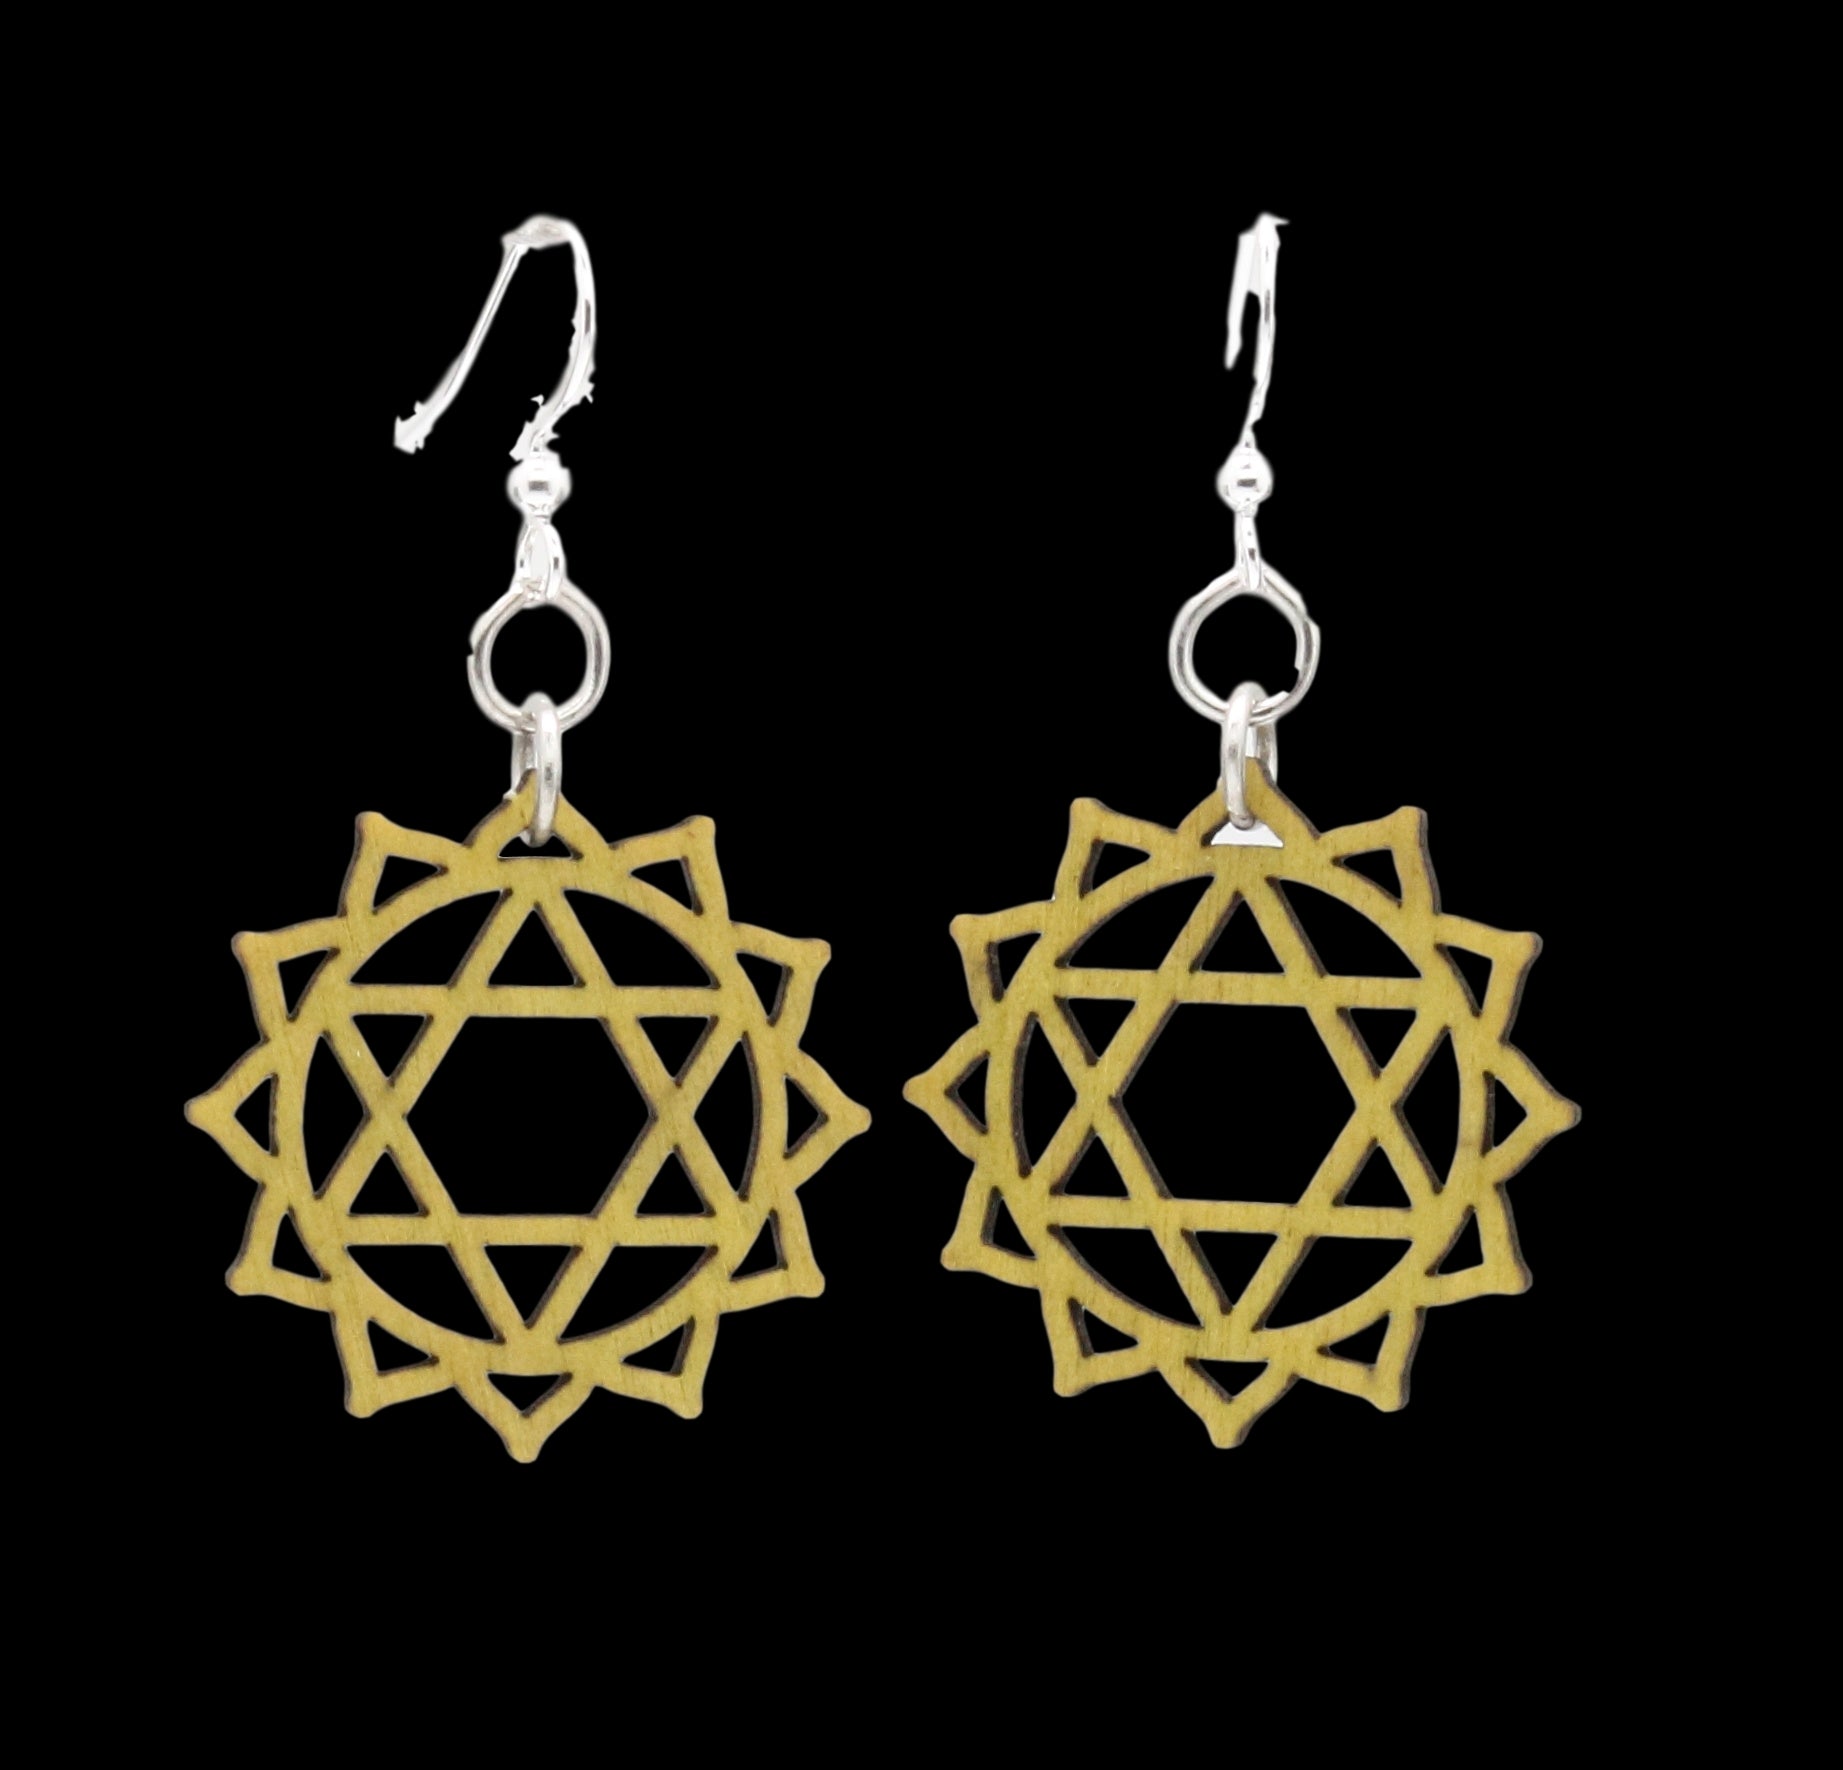 Eco-Friendly Anahata Chakra Earrings - Hypoallergenic Silver Ear Wires - Laser-Cut Wood - Made in USA Bijou Her